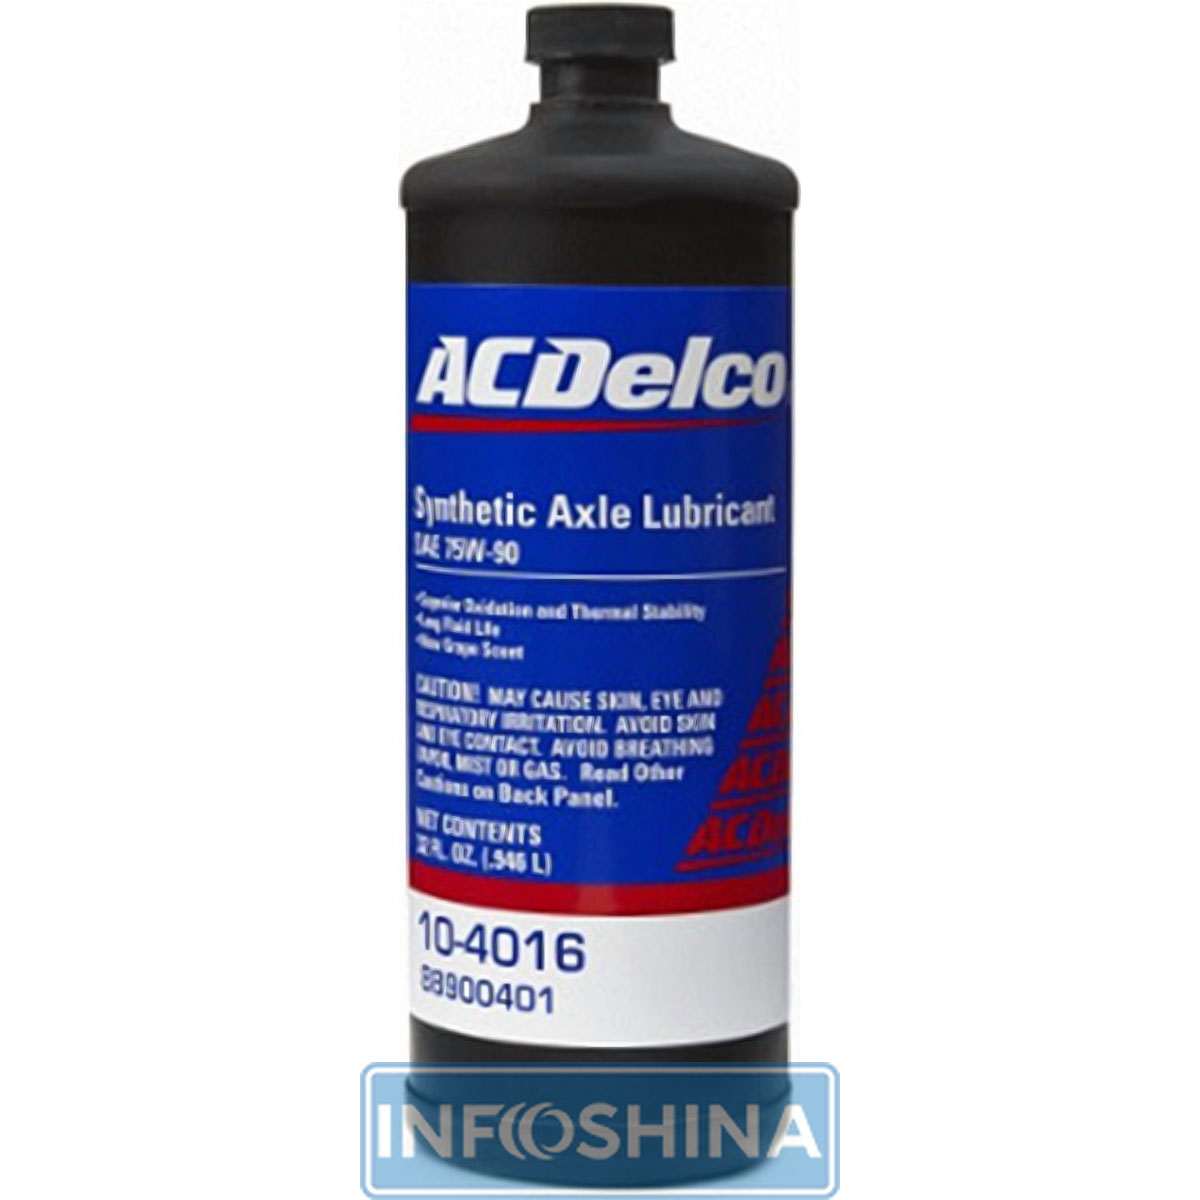 ACDelco Synthetic Axle Lubricant 75W-90 GL-5